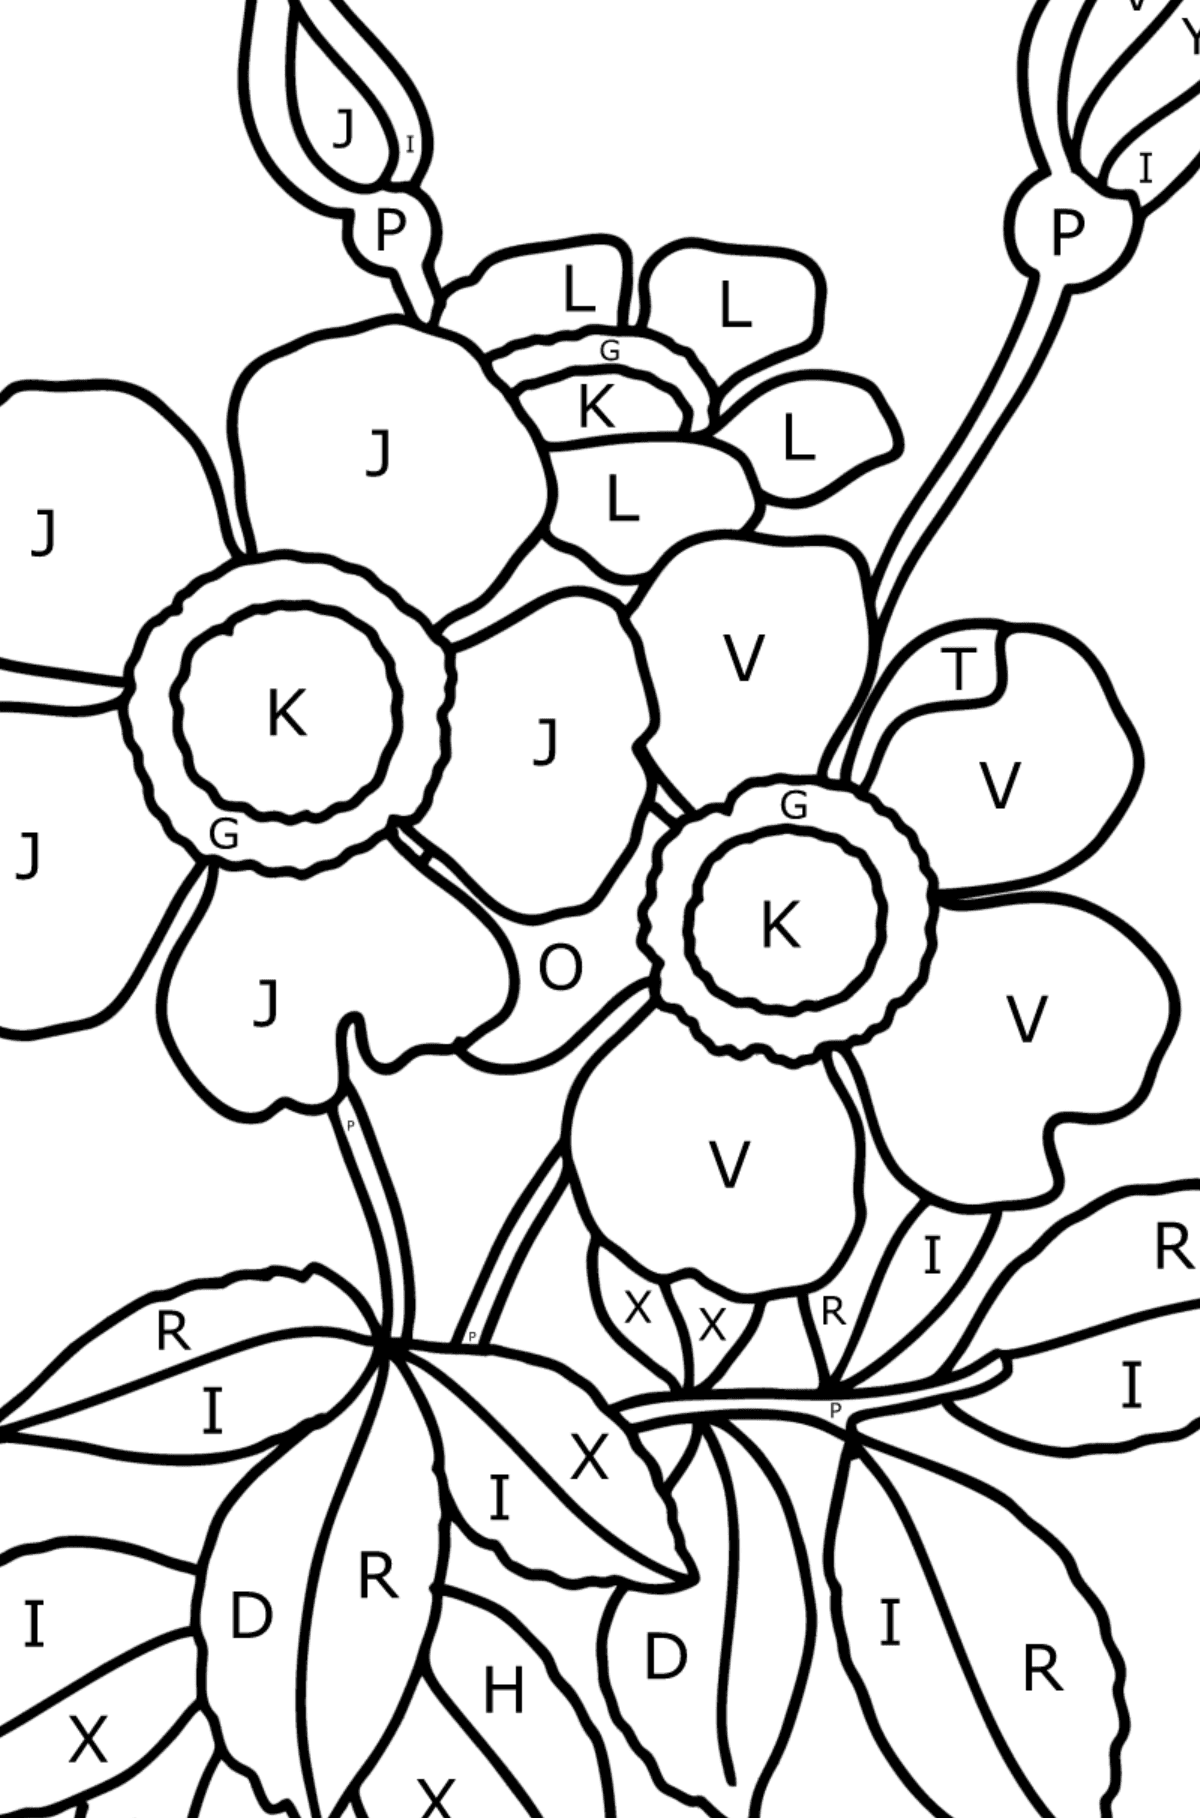 Spray rose coloring page - Coloring by Letters for Kids